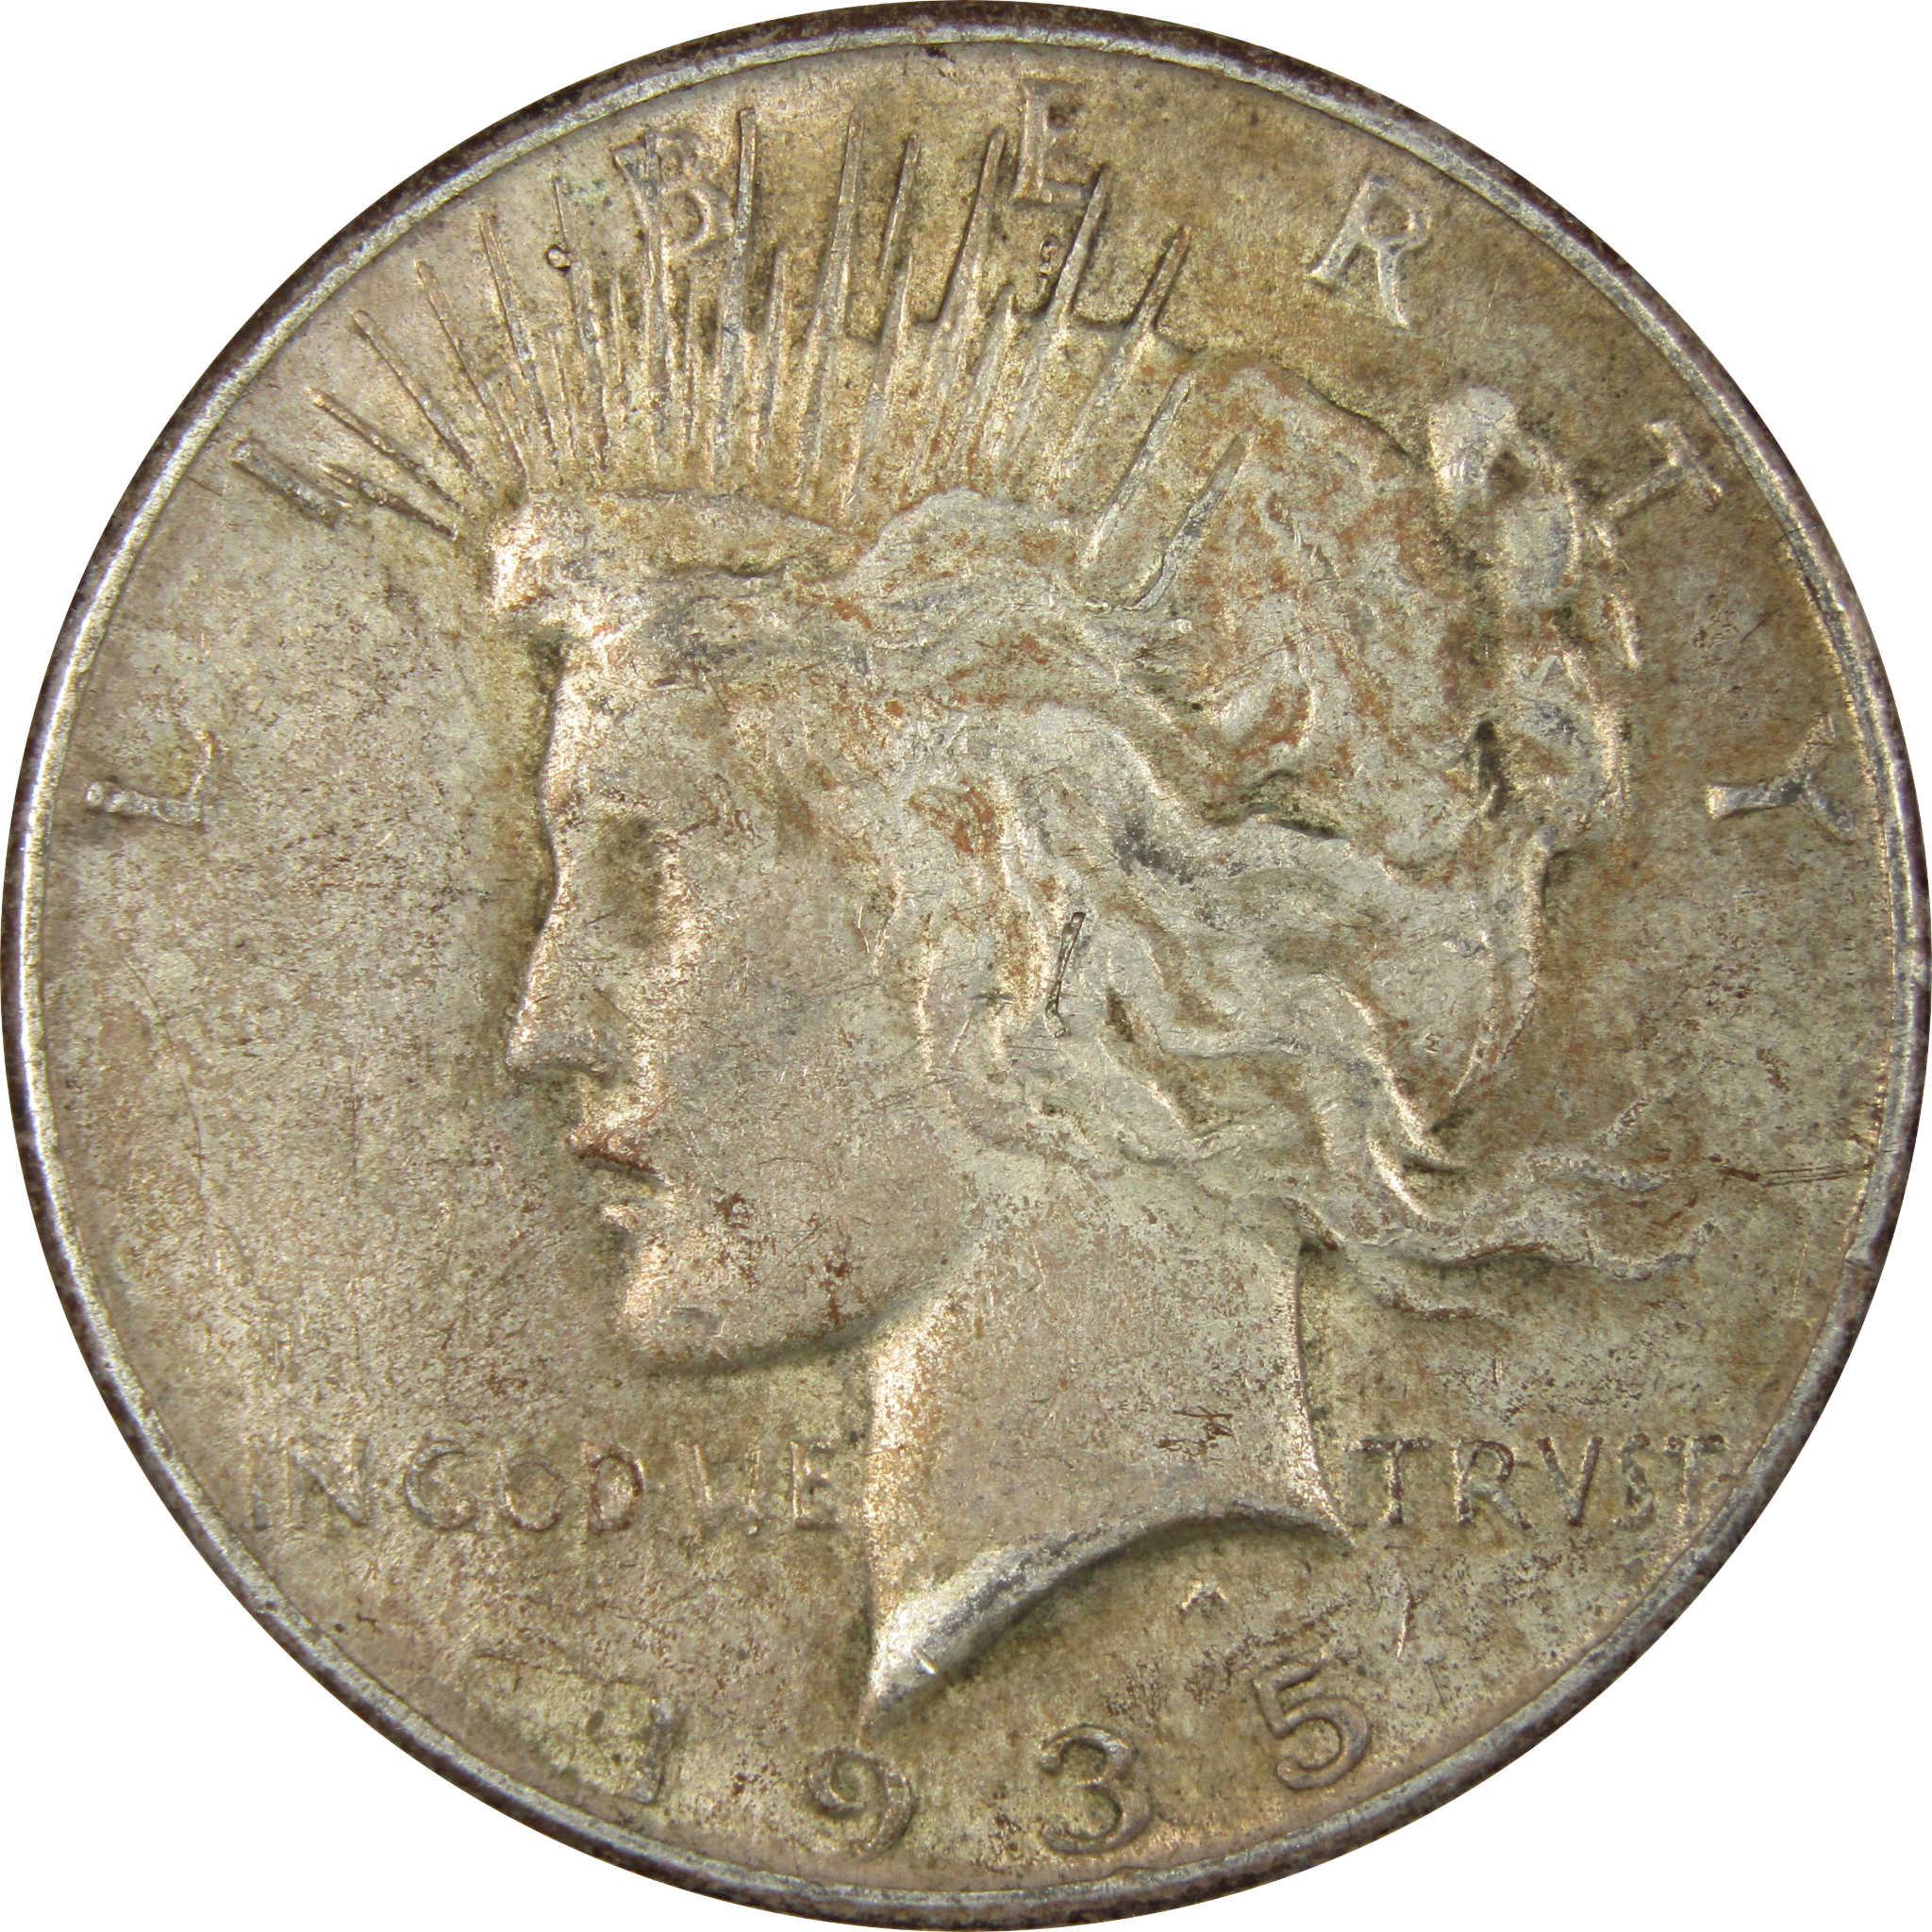 1935 Peace Dollar XF EF Extremely Fine 90% Silver Coin SKU:IPC8332